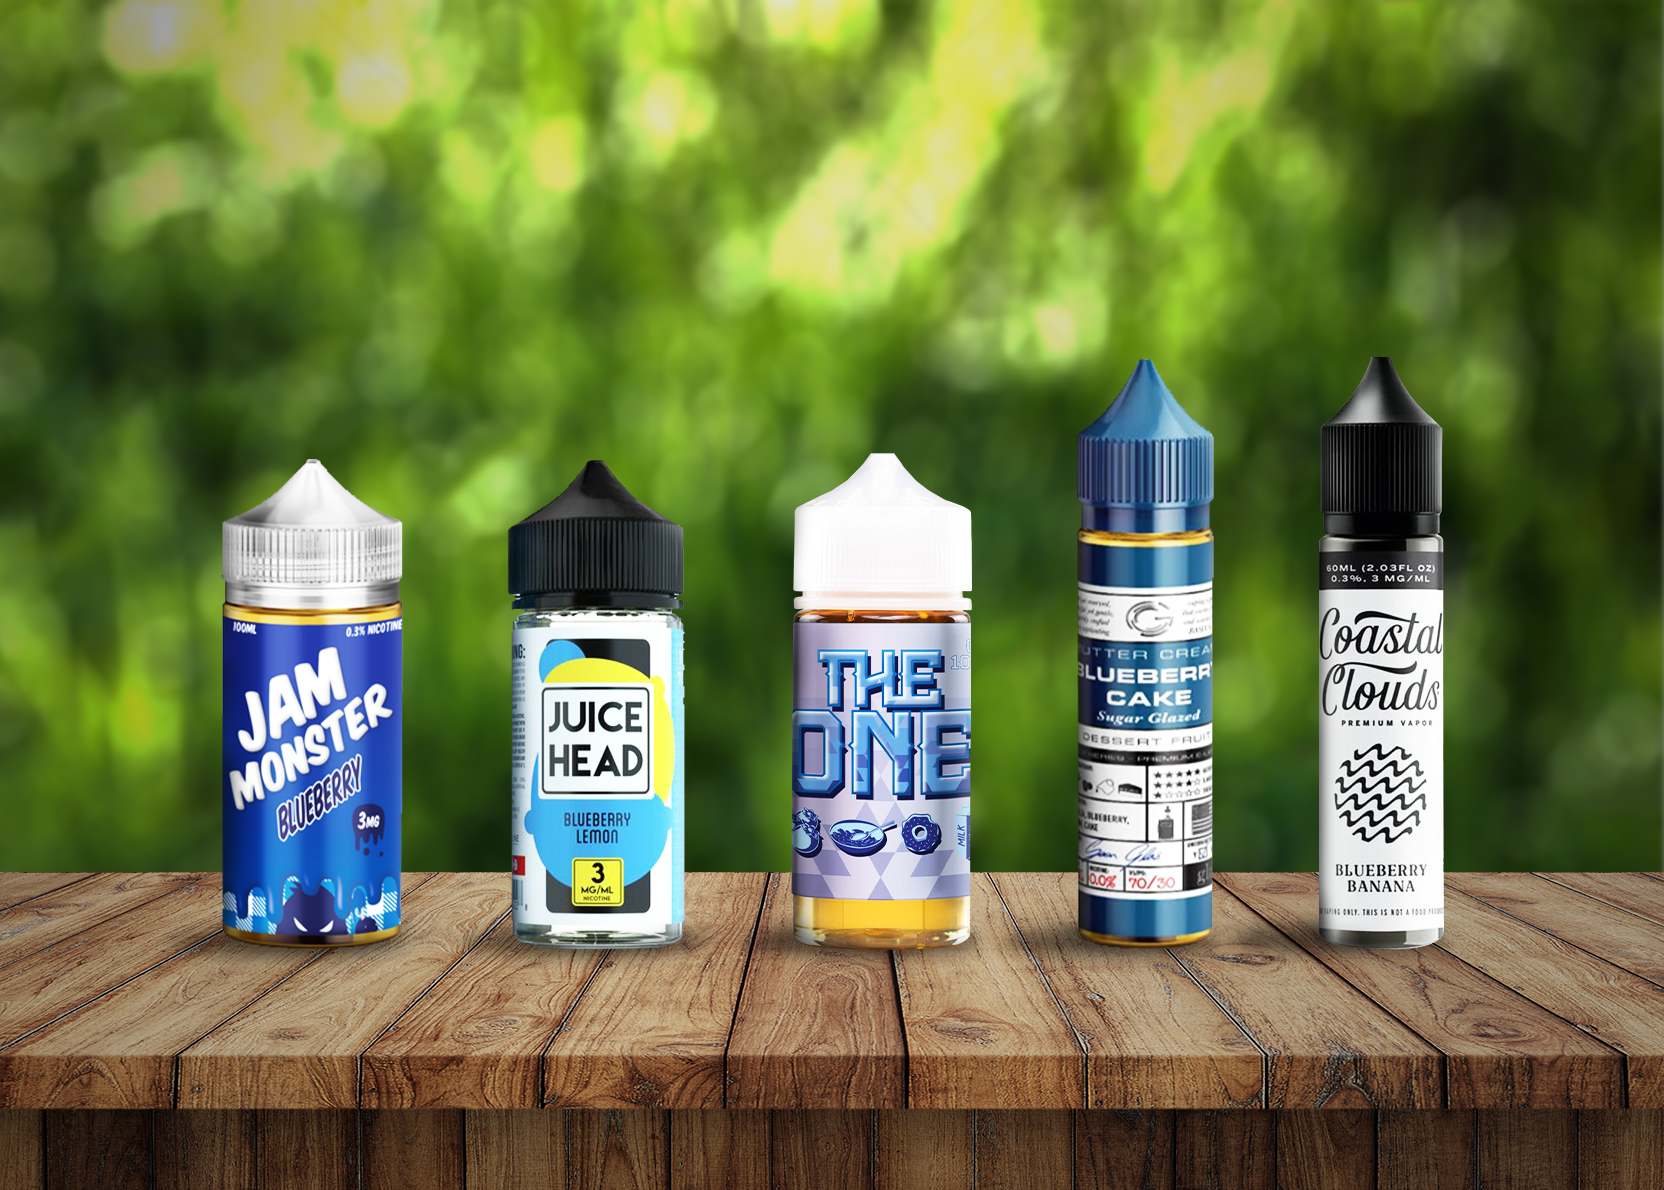 What are the 5 hot selling blueberry flavored e-juice/e-liquid